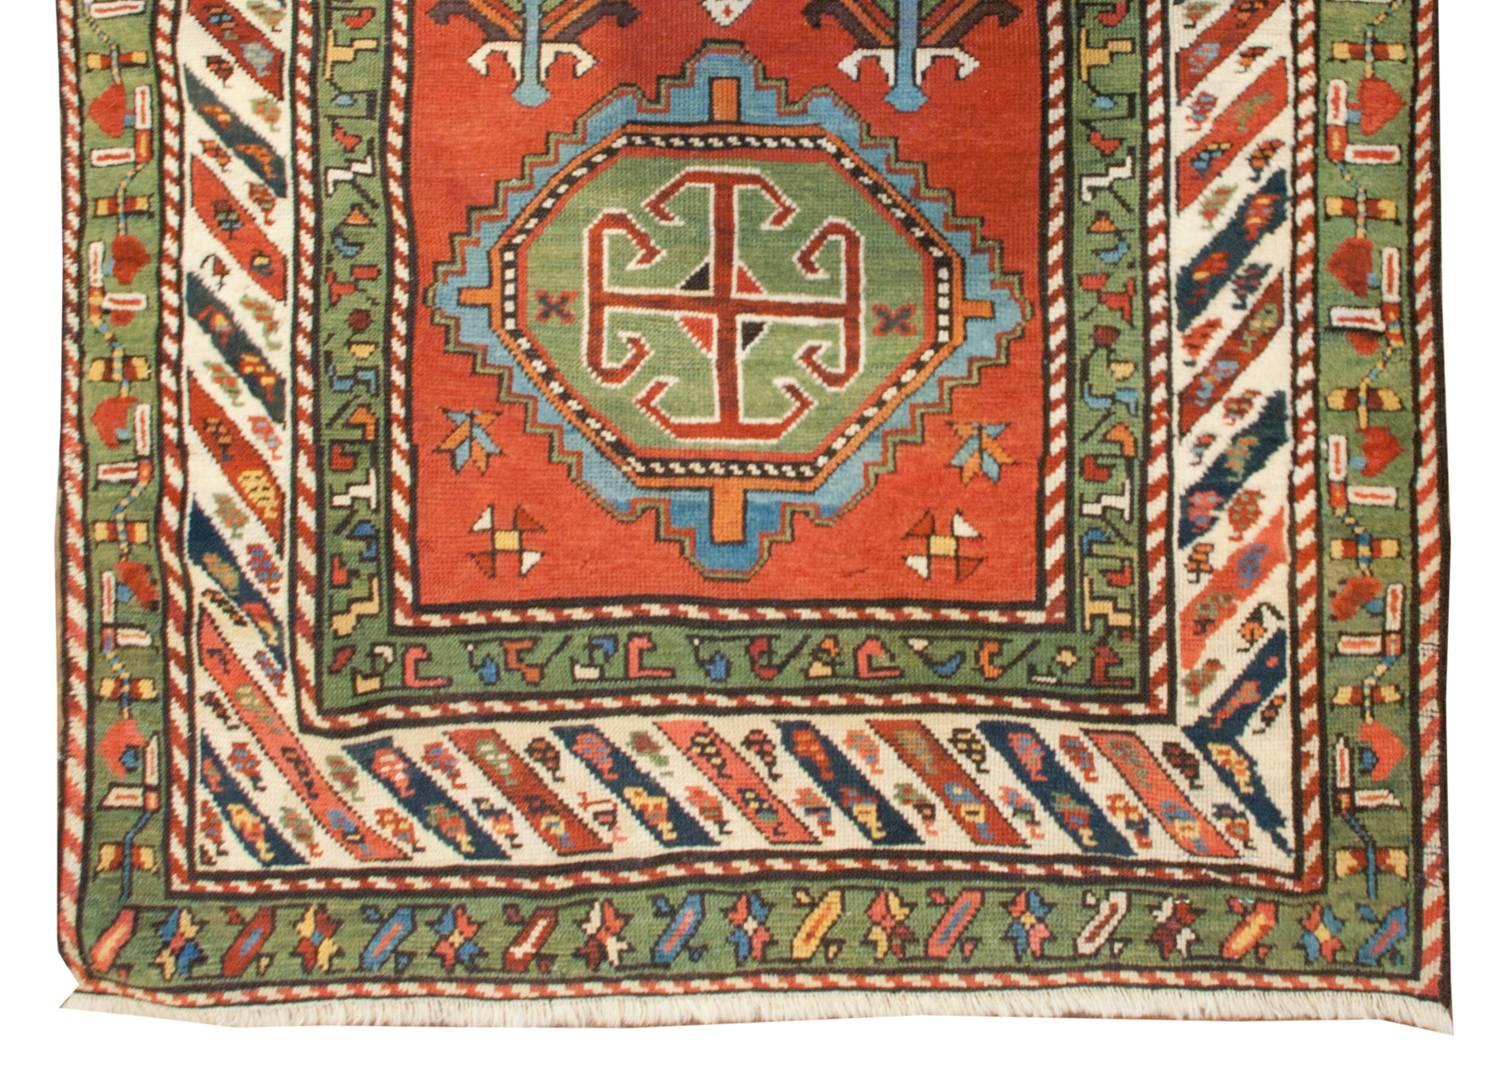 An important early 20th century Persian Kazak runner with six wonderful large-scale floral medallions, each woven in a different pattern and color way. Rare pale green dyed wool is prominently featured throughout this rug, which is a unique color